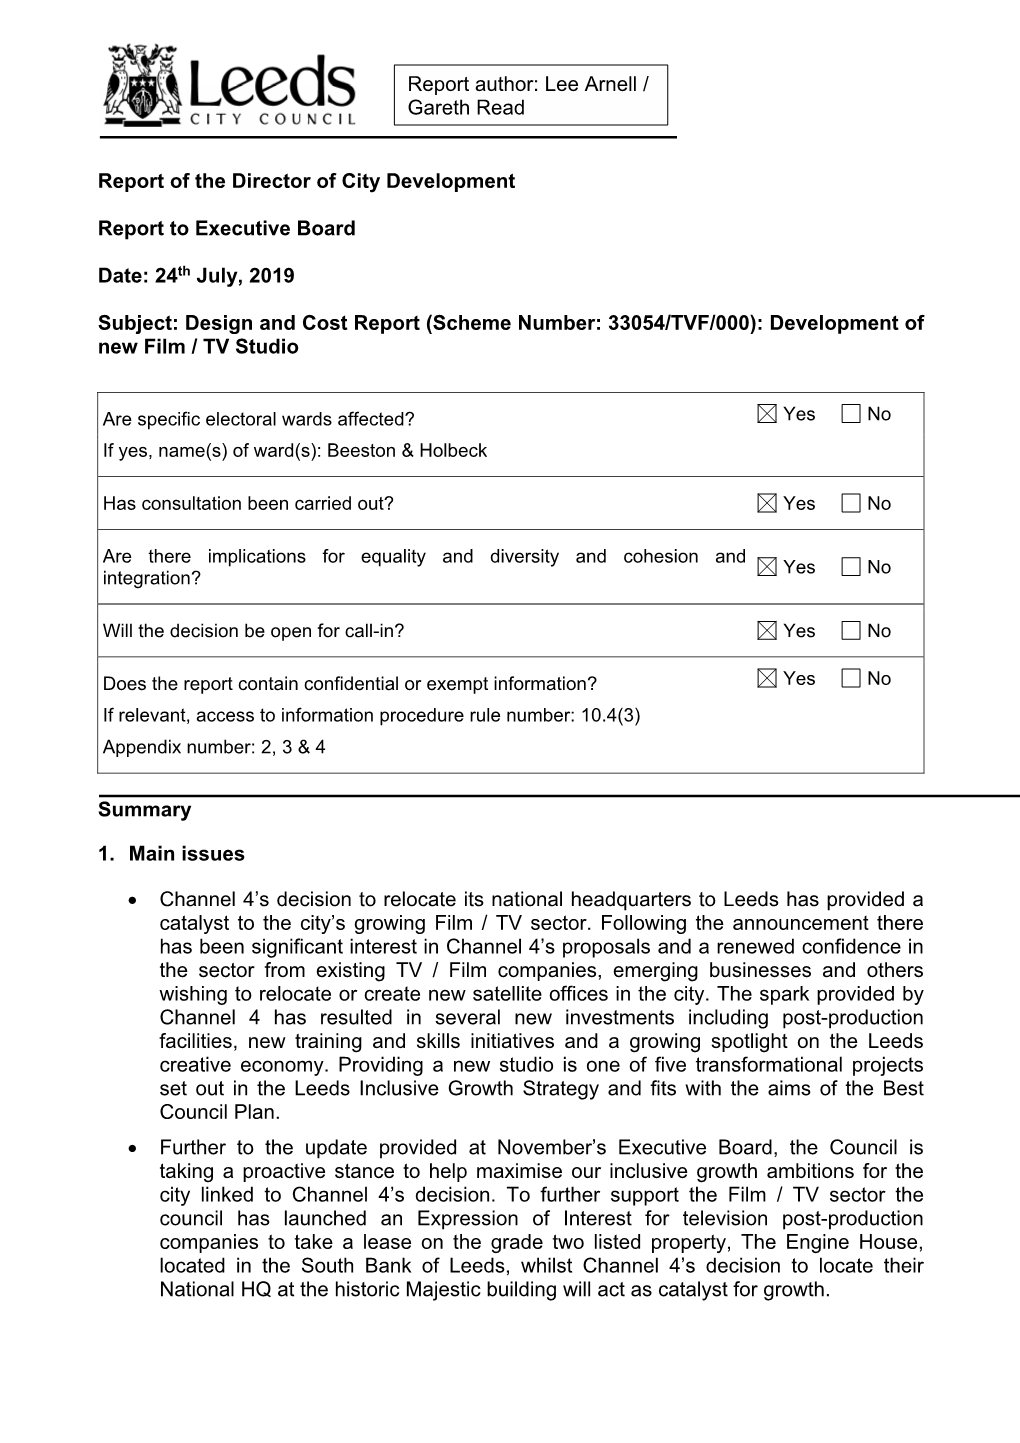 Report Author: Lee Arnell / Gareth Read Report of the Director of City Development Report to Executive Board Date: 24Th July, 20